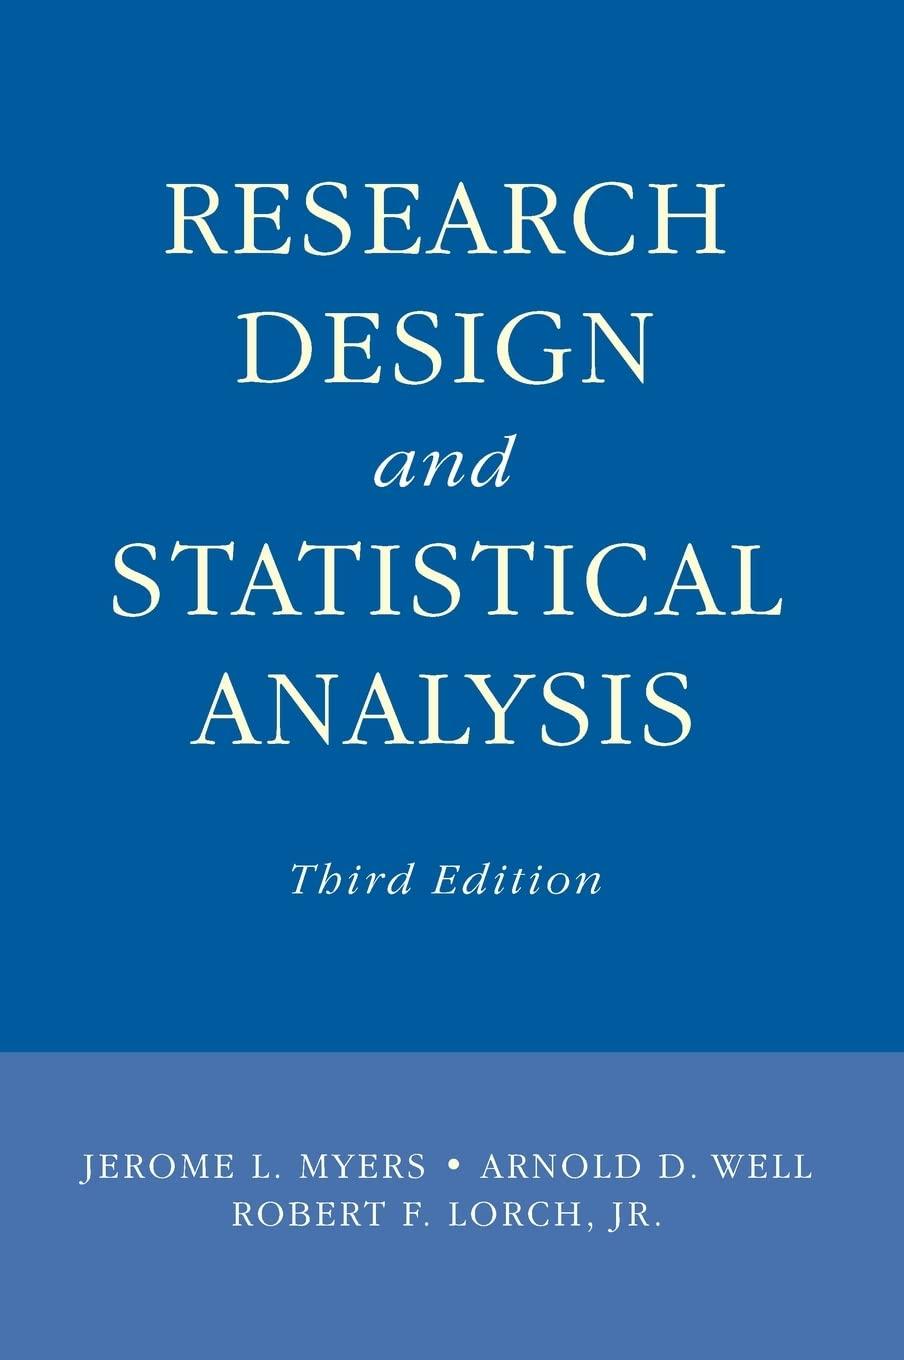 research design and statistical analysis 3rd edition jerome l. myers, arnold d. well, robert f. lorch jr